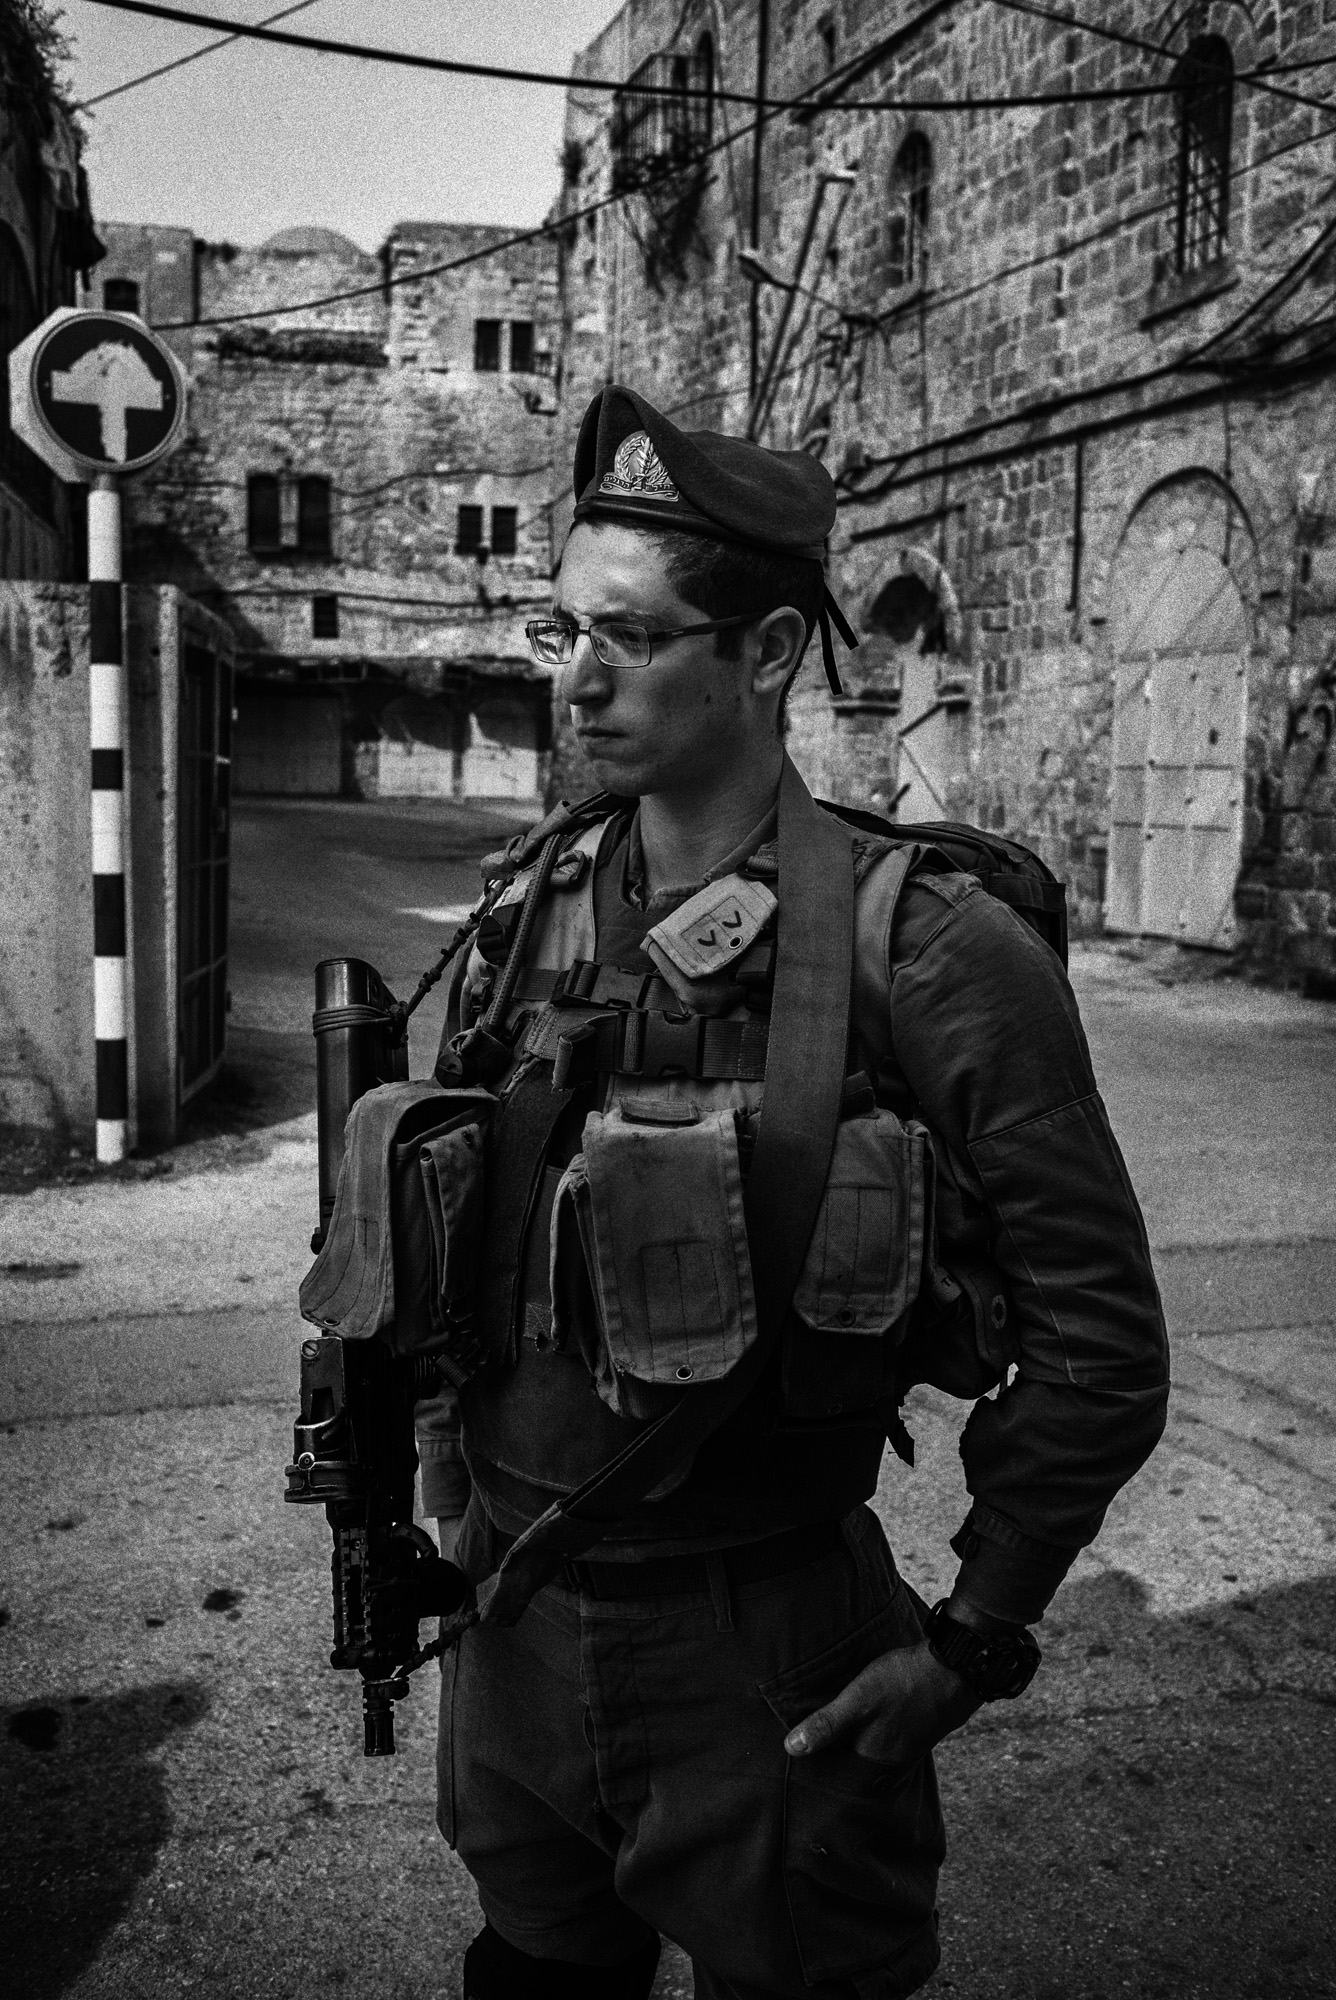 An Israeli soldier stands at a checkpoint in the H2 area of Hebron, November 2015. In late October a Palestinian man was fatally shot here while. Amnesty International said he was retrieving an ID card at the request of a soldier. The rights organization said Israeli authorities labeled the incident an "attempted stabbing."